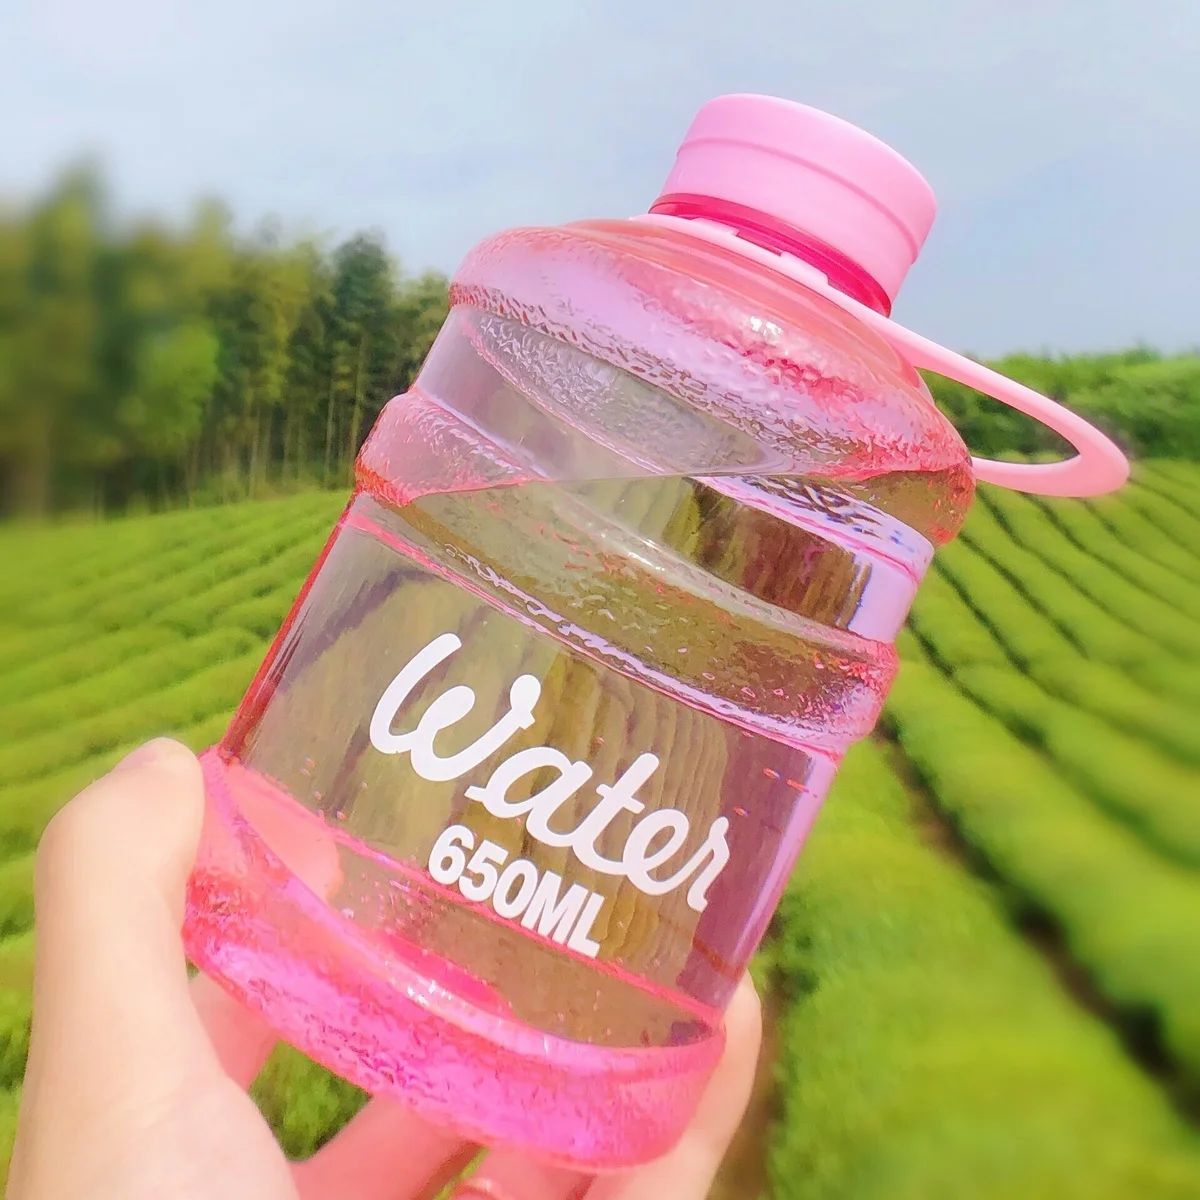 https://ae01.alicdn.com/kf/H94be3530b6b44c379c336896f7f387c1h/Portable-Frosted-Plastic-Water-Bottle-Cute-Female-Student-Chrilcren-Clear-Fall-Resistant-Juice-Water-Bottle.jpg